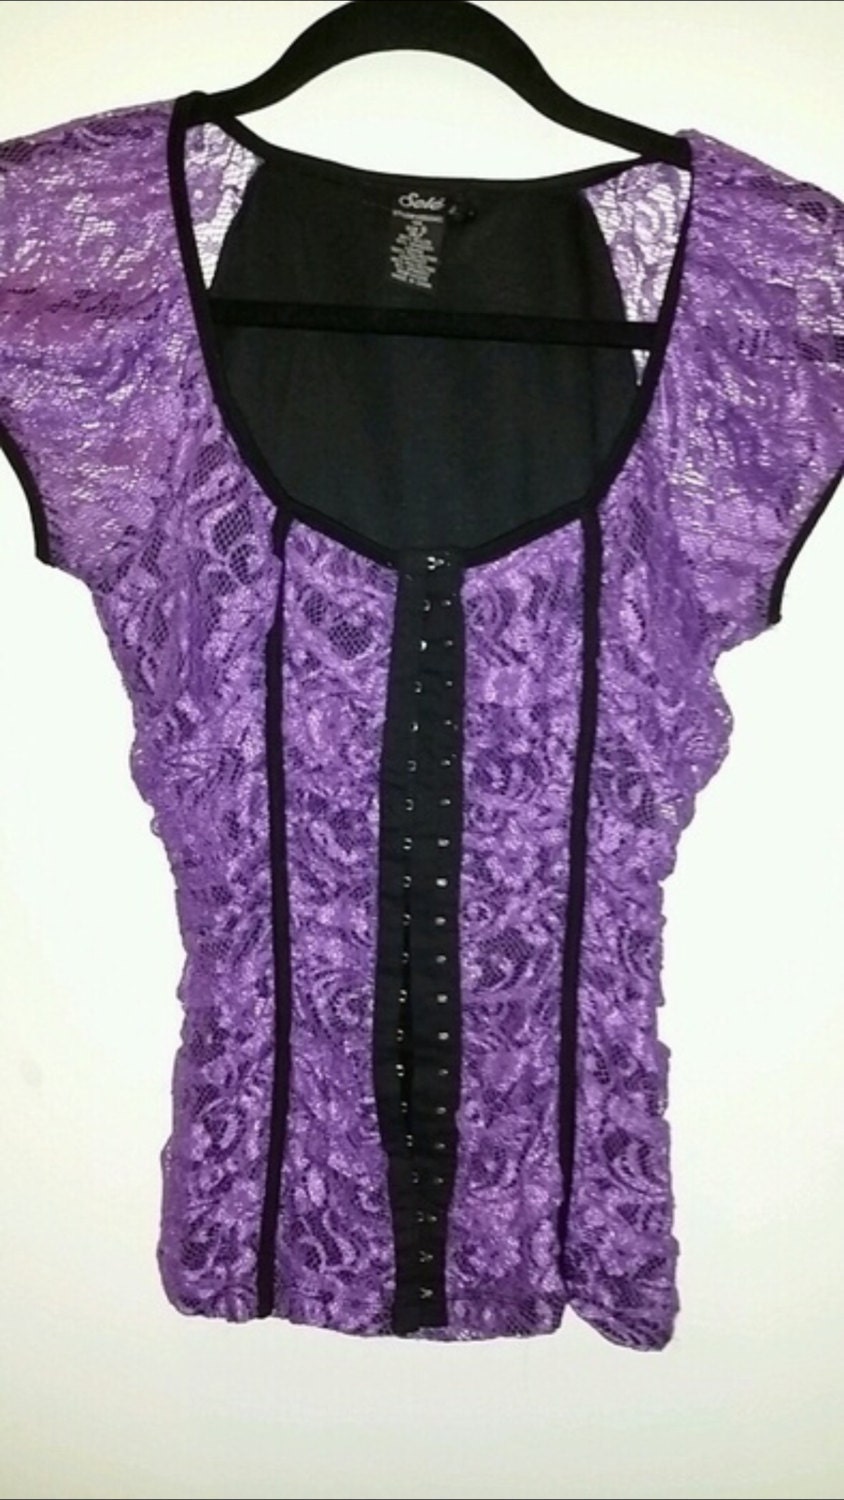 Purple and black Lace Corset top